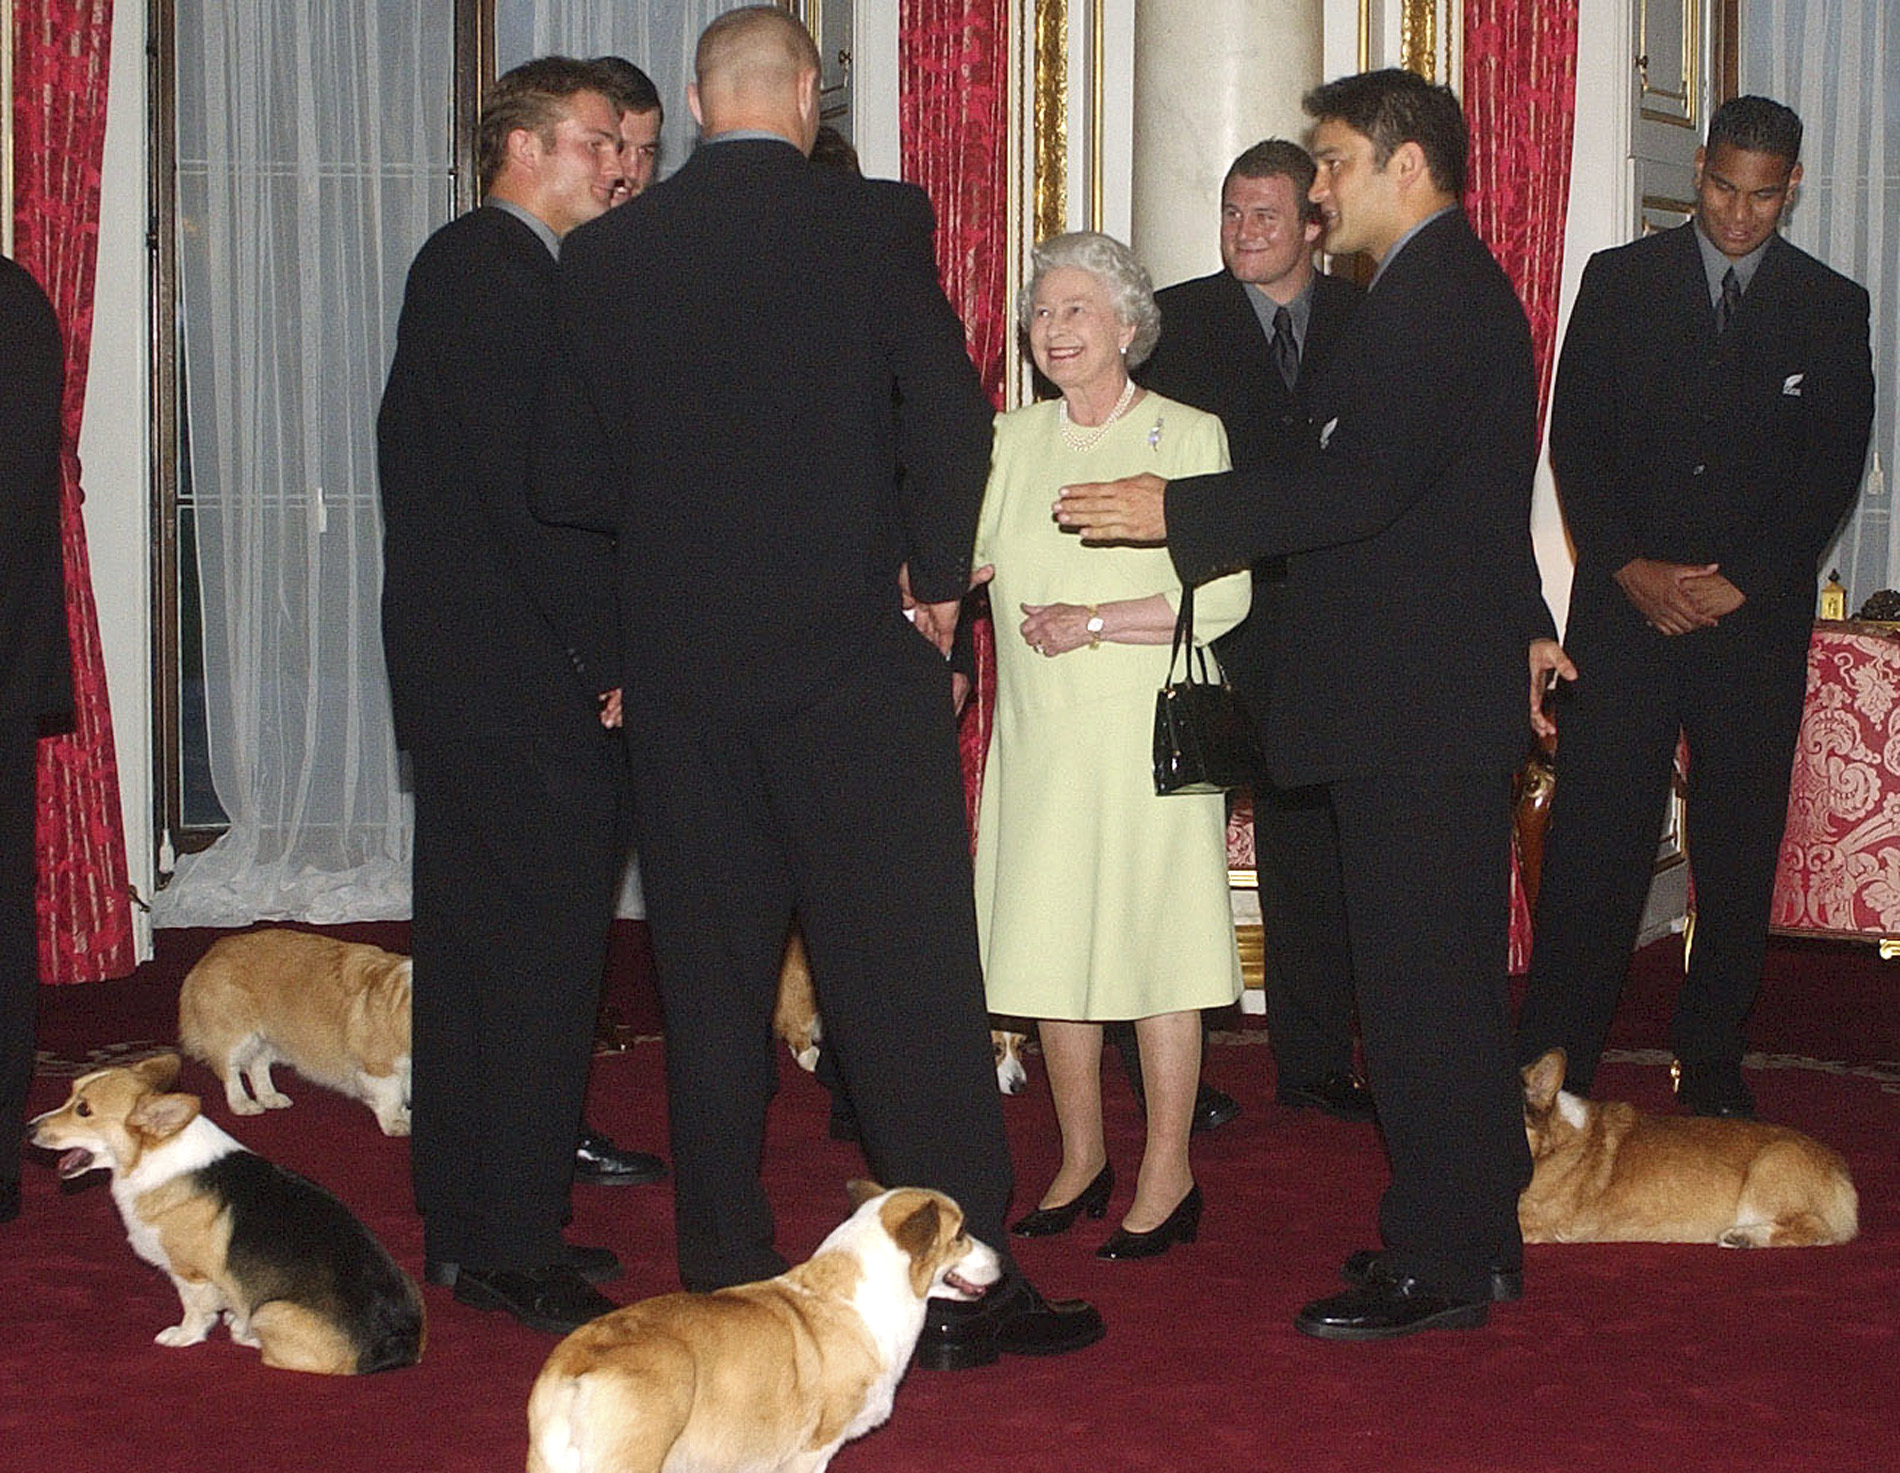 FILE - Britain's Queen Elizabeth II meets the New Zealand All Blacks rugby team will the royal corgis in attendance at Buckingham Palace, London Tuesday Nov. 5, 2002. Queen Elizabeth II's corgis were a key part of her public persona and her death has raised concern over who will care for her beloved dogs. The corgis were always by her side and lived a life of privilege fit for a royal. She owned nearly 30 throughout her life. She is reportedly survived by four dogs. (AP Photo/Kirsty Wigglesworth, Pool)